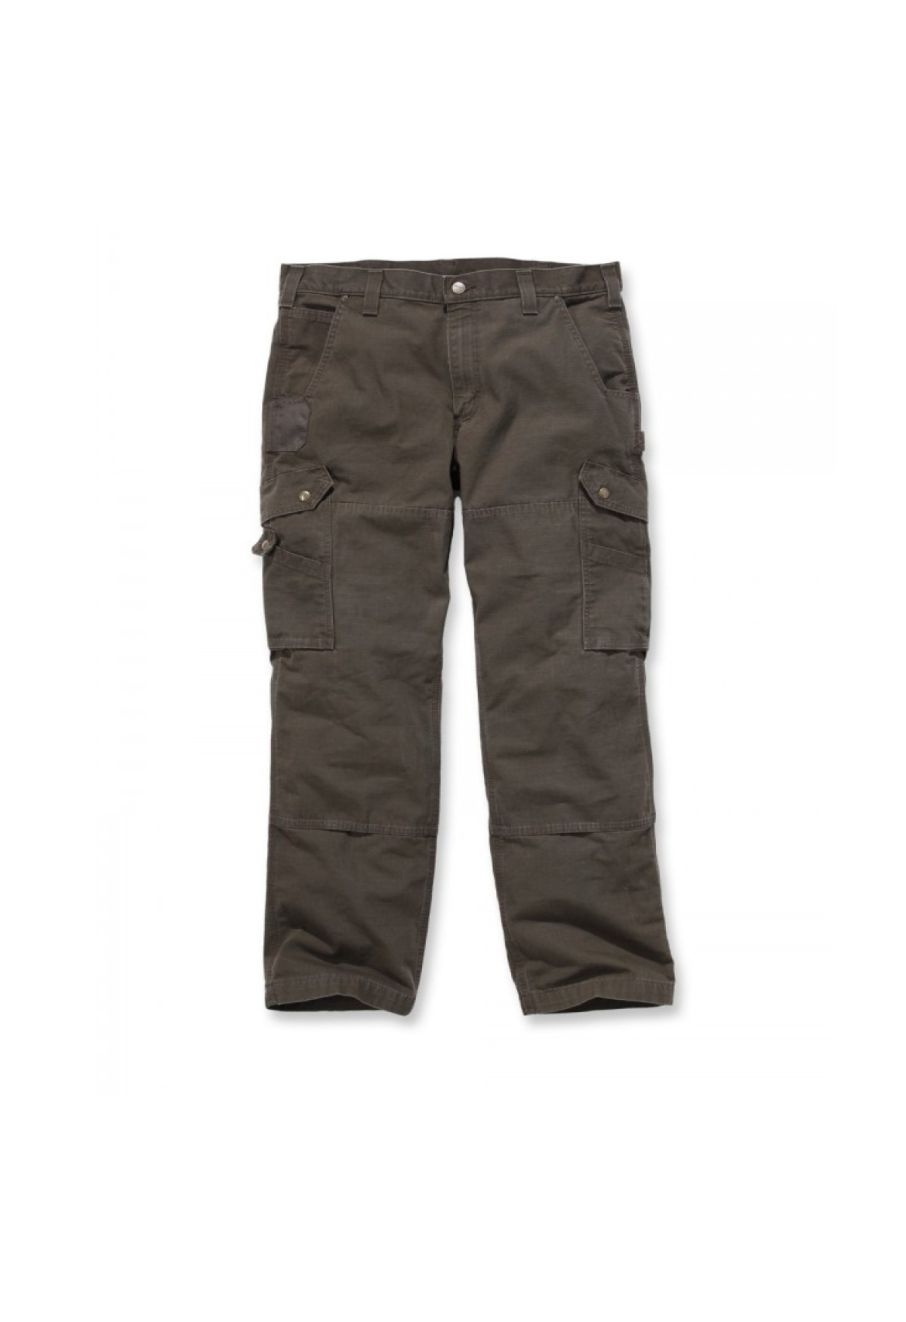 PANTS-B342 Ripstop Cargo Work Pant (in Desert) (SEE IMPORTANT